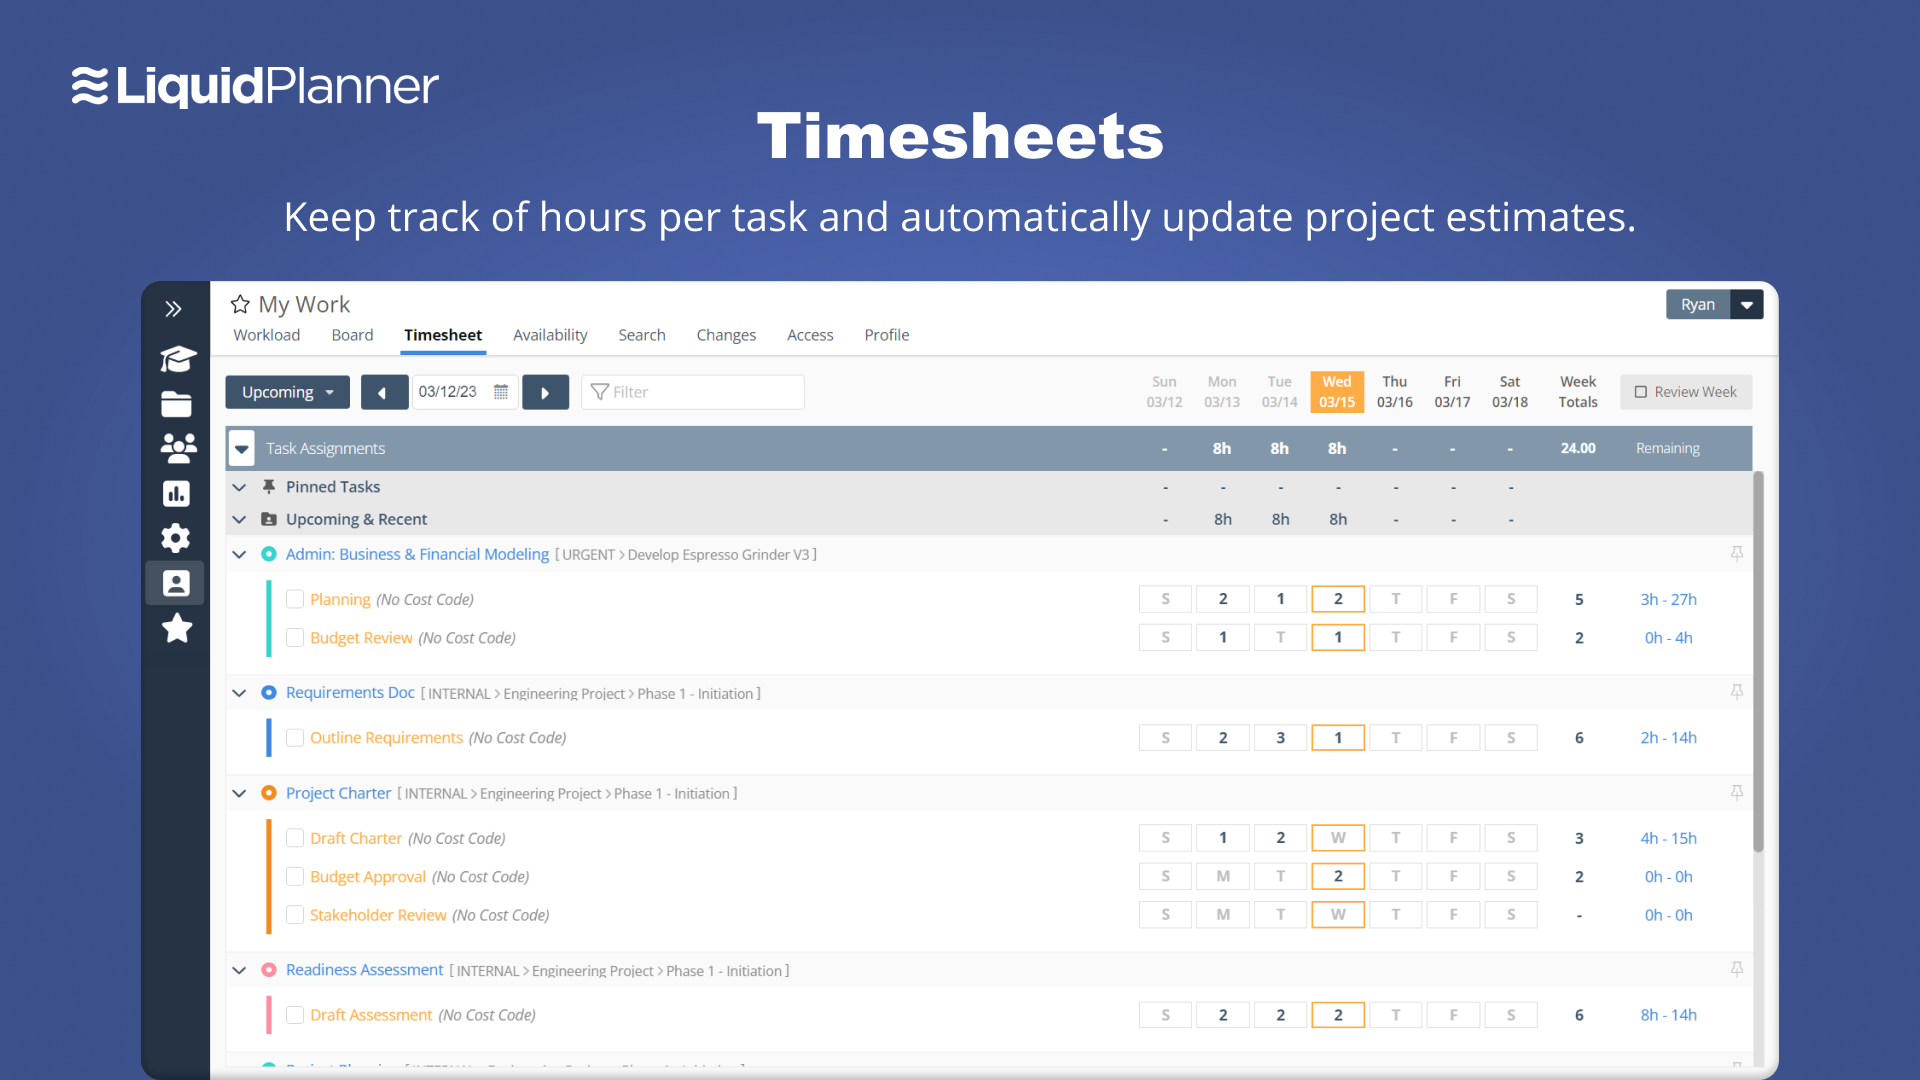 LiquidPlanner Software - Time Sheets allow you to track how many hours are spent on tasks and projects, so you have deeper insights into where your time is spent. Time tracking allows you to collaborate with your team more efficiently,  to make the most of your team's time and re